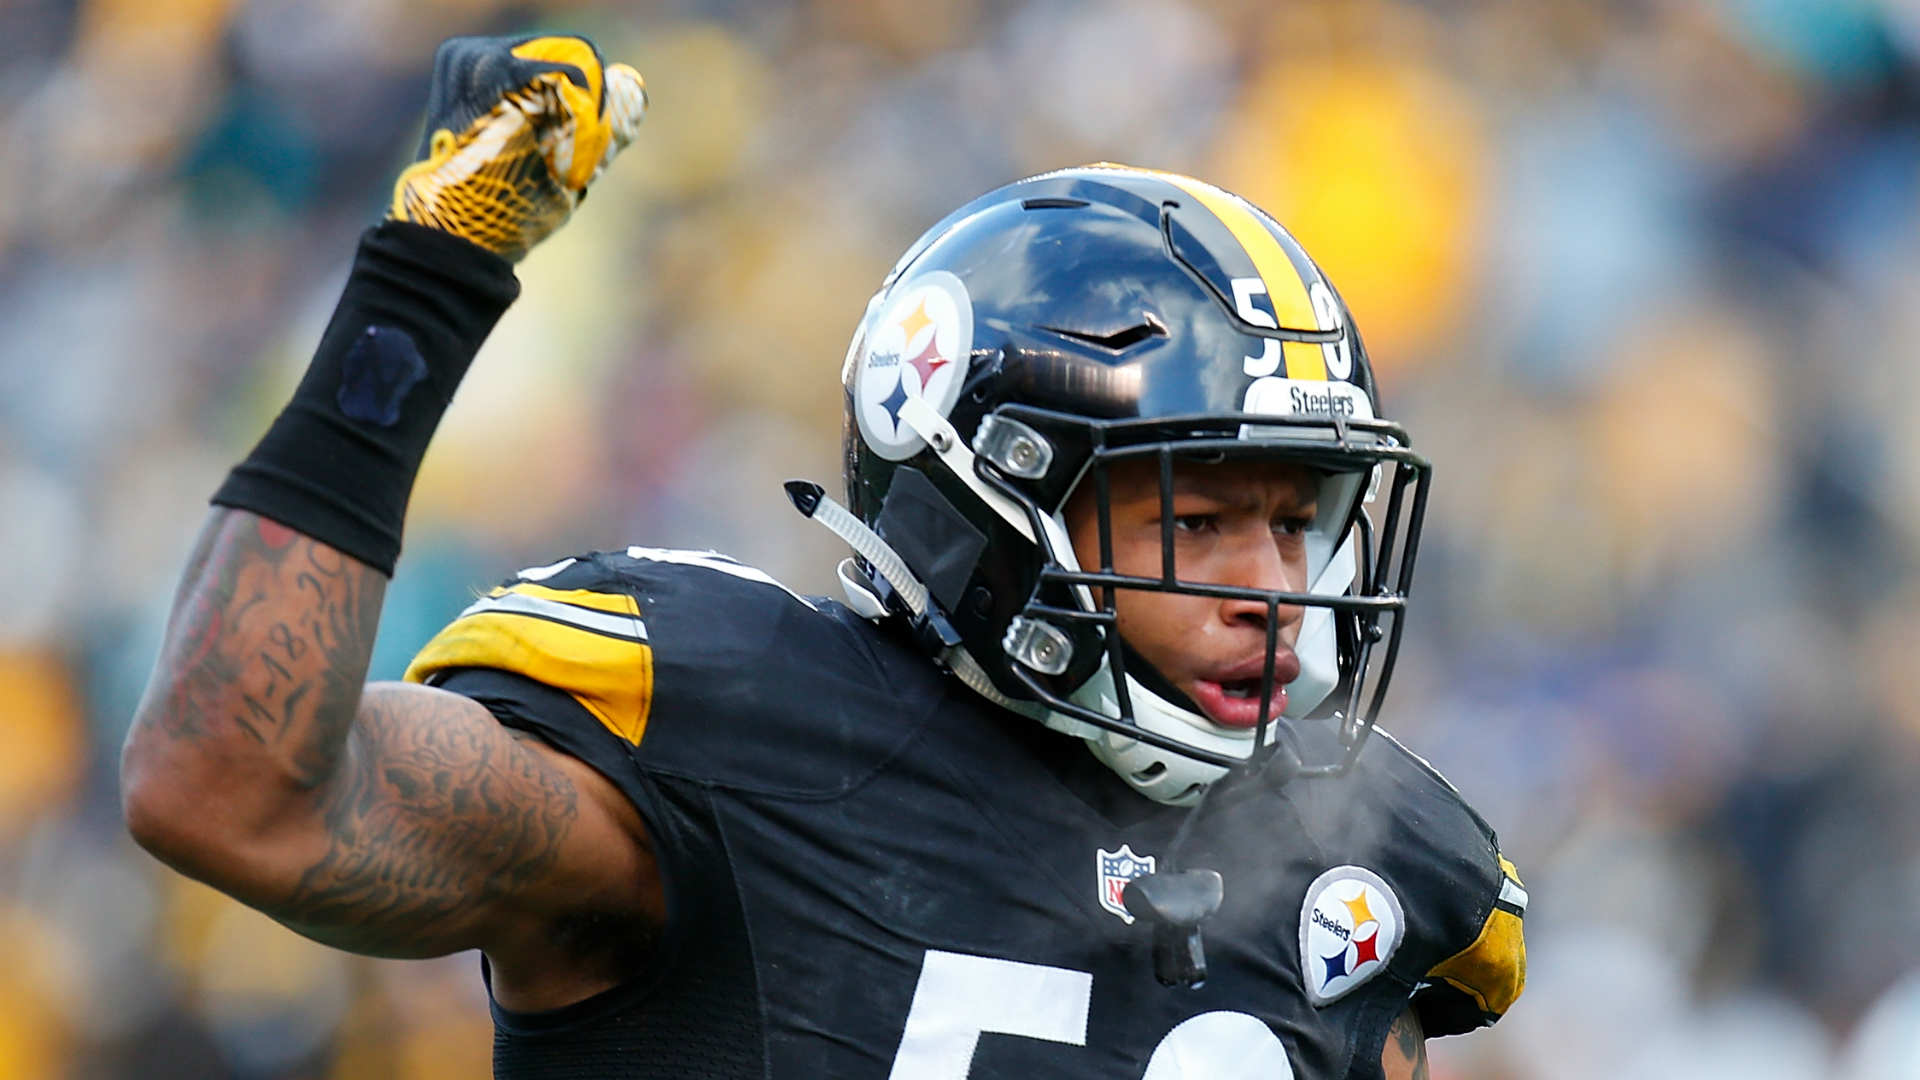 Just two days after the one-year mark of his horrific spinal injury, Ryan Shazier shared a video on Instagram of himself deadlifting.